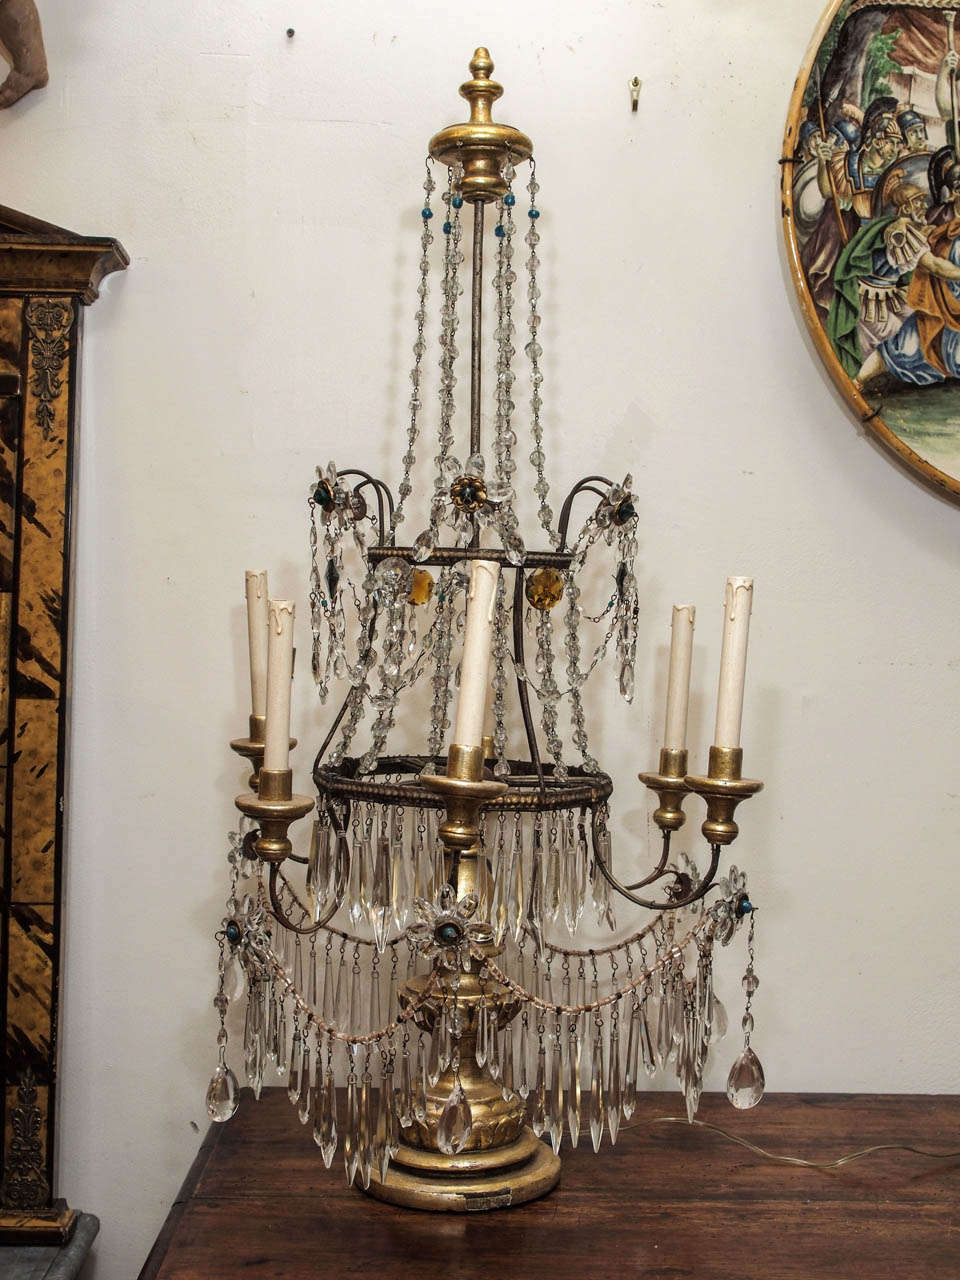 Rare Italian Gilt Wood and Iron Genovese Girandoles Mid 19th c. The candle cups are 20th c. Replacements for the wiring.